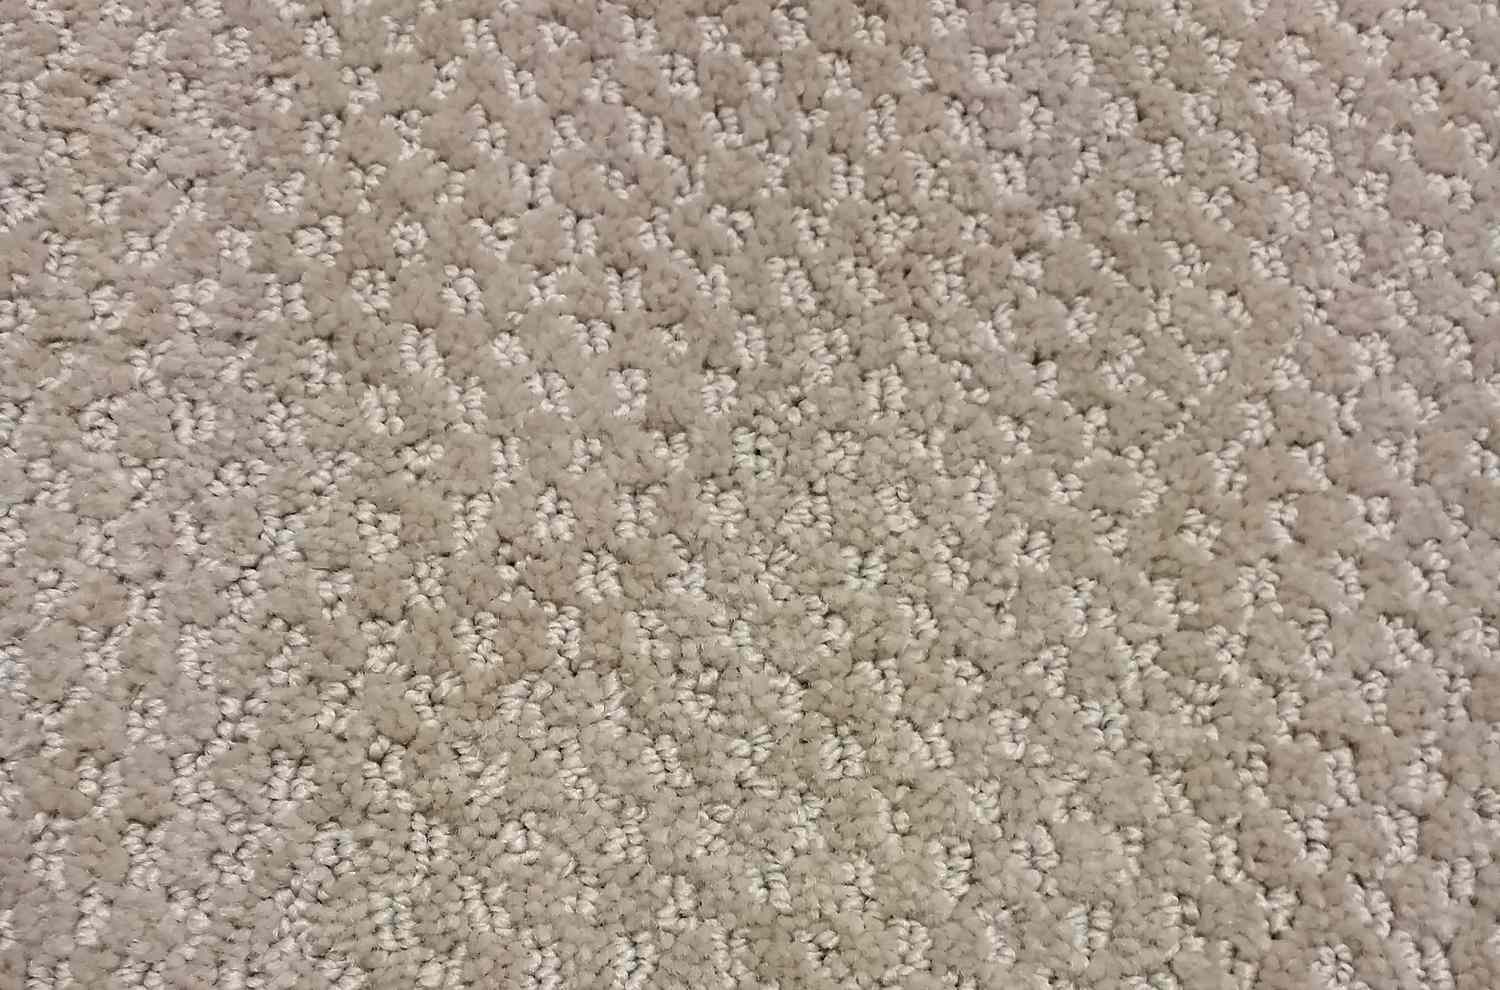 Greige pin dot cut and loop style carpet